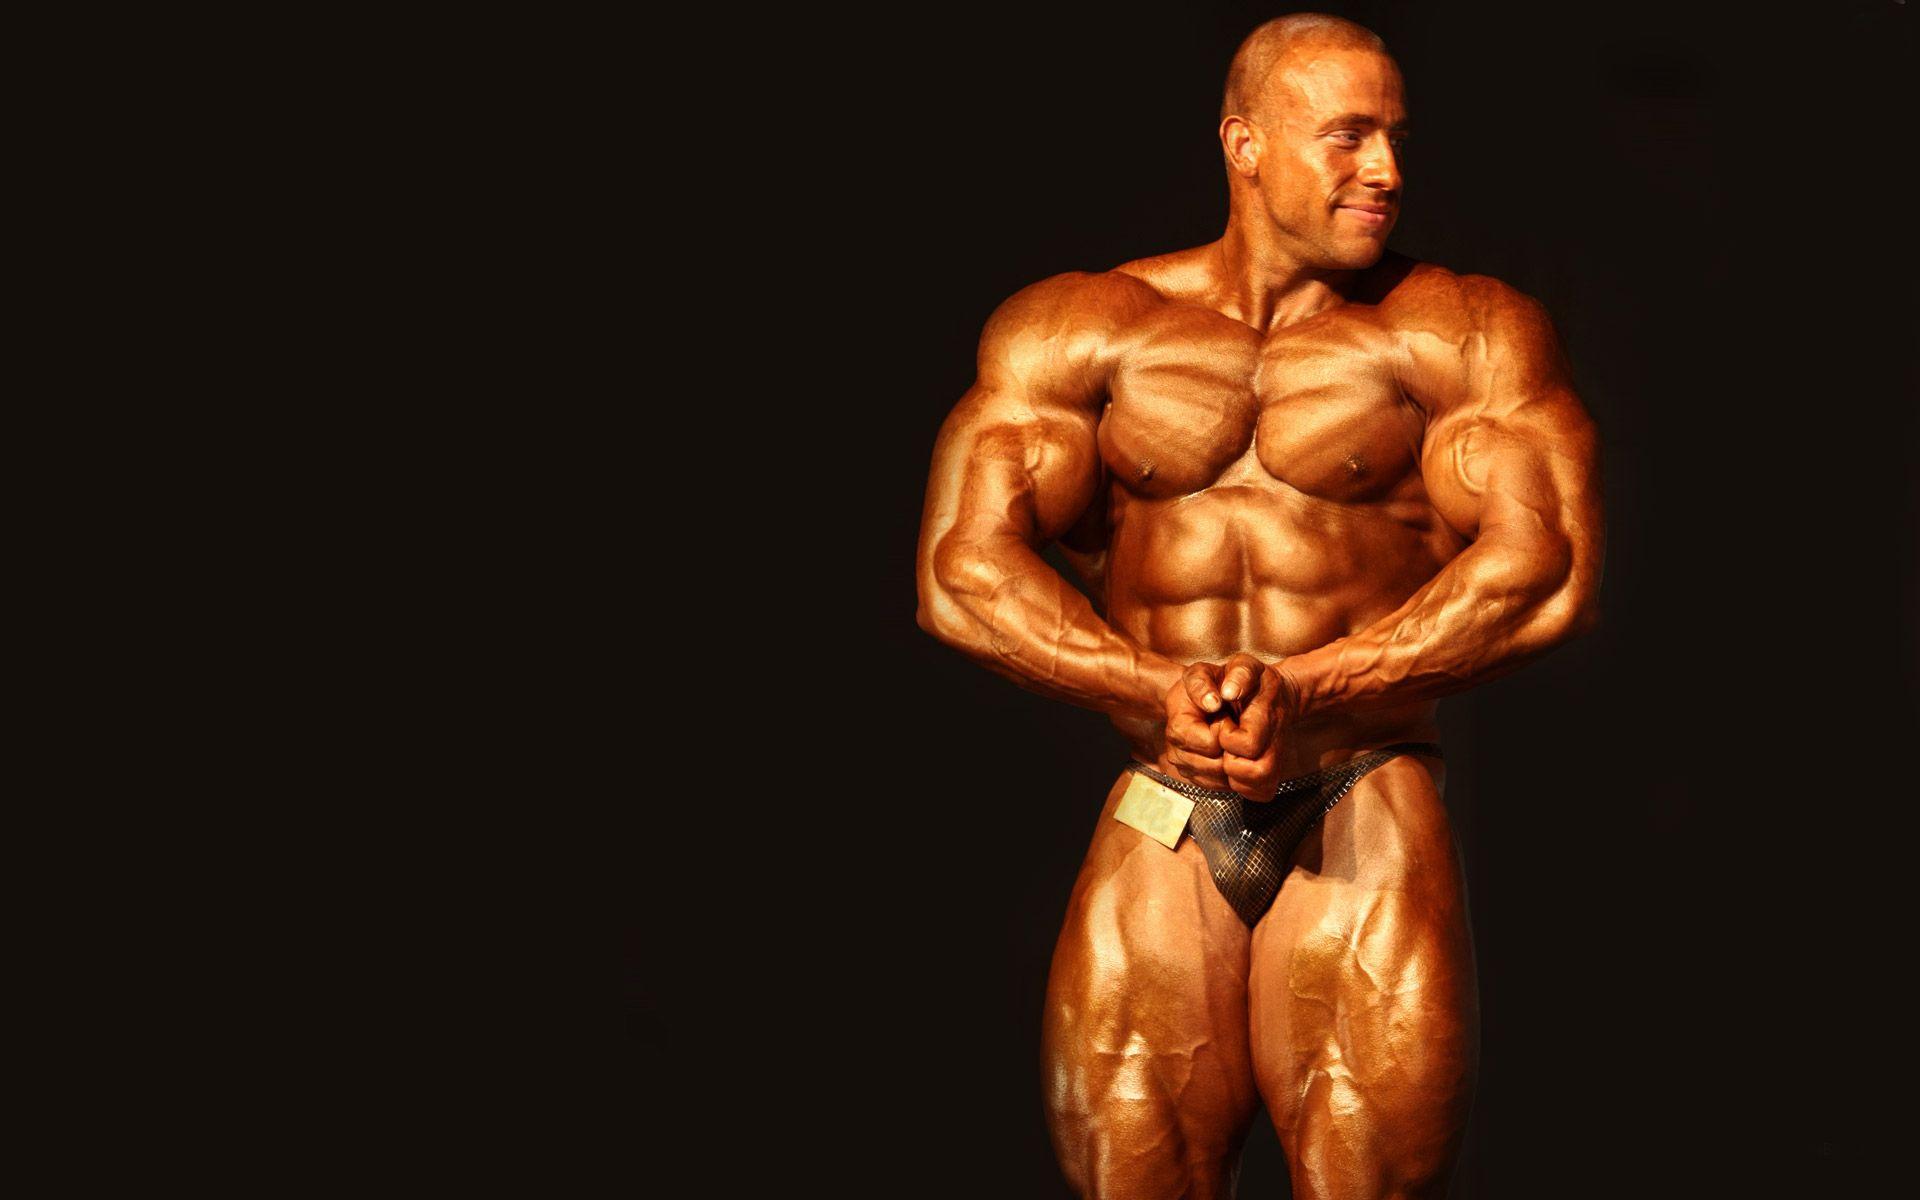 You can download latest photo gallery of Bodybuilding HD